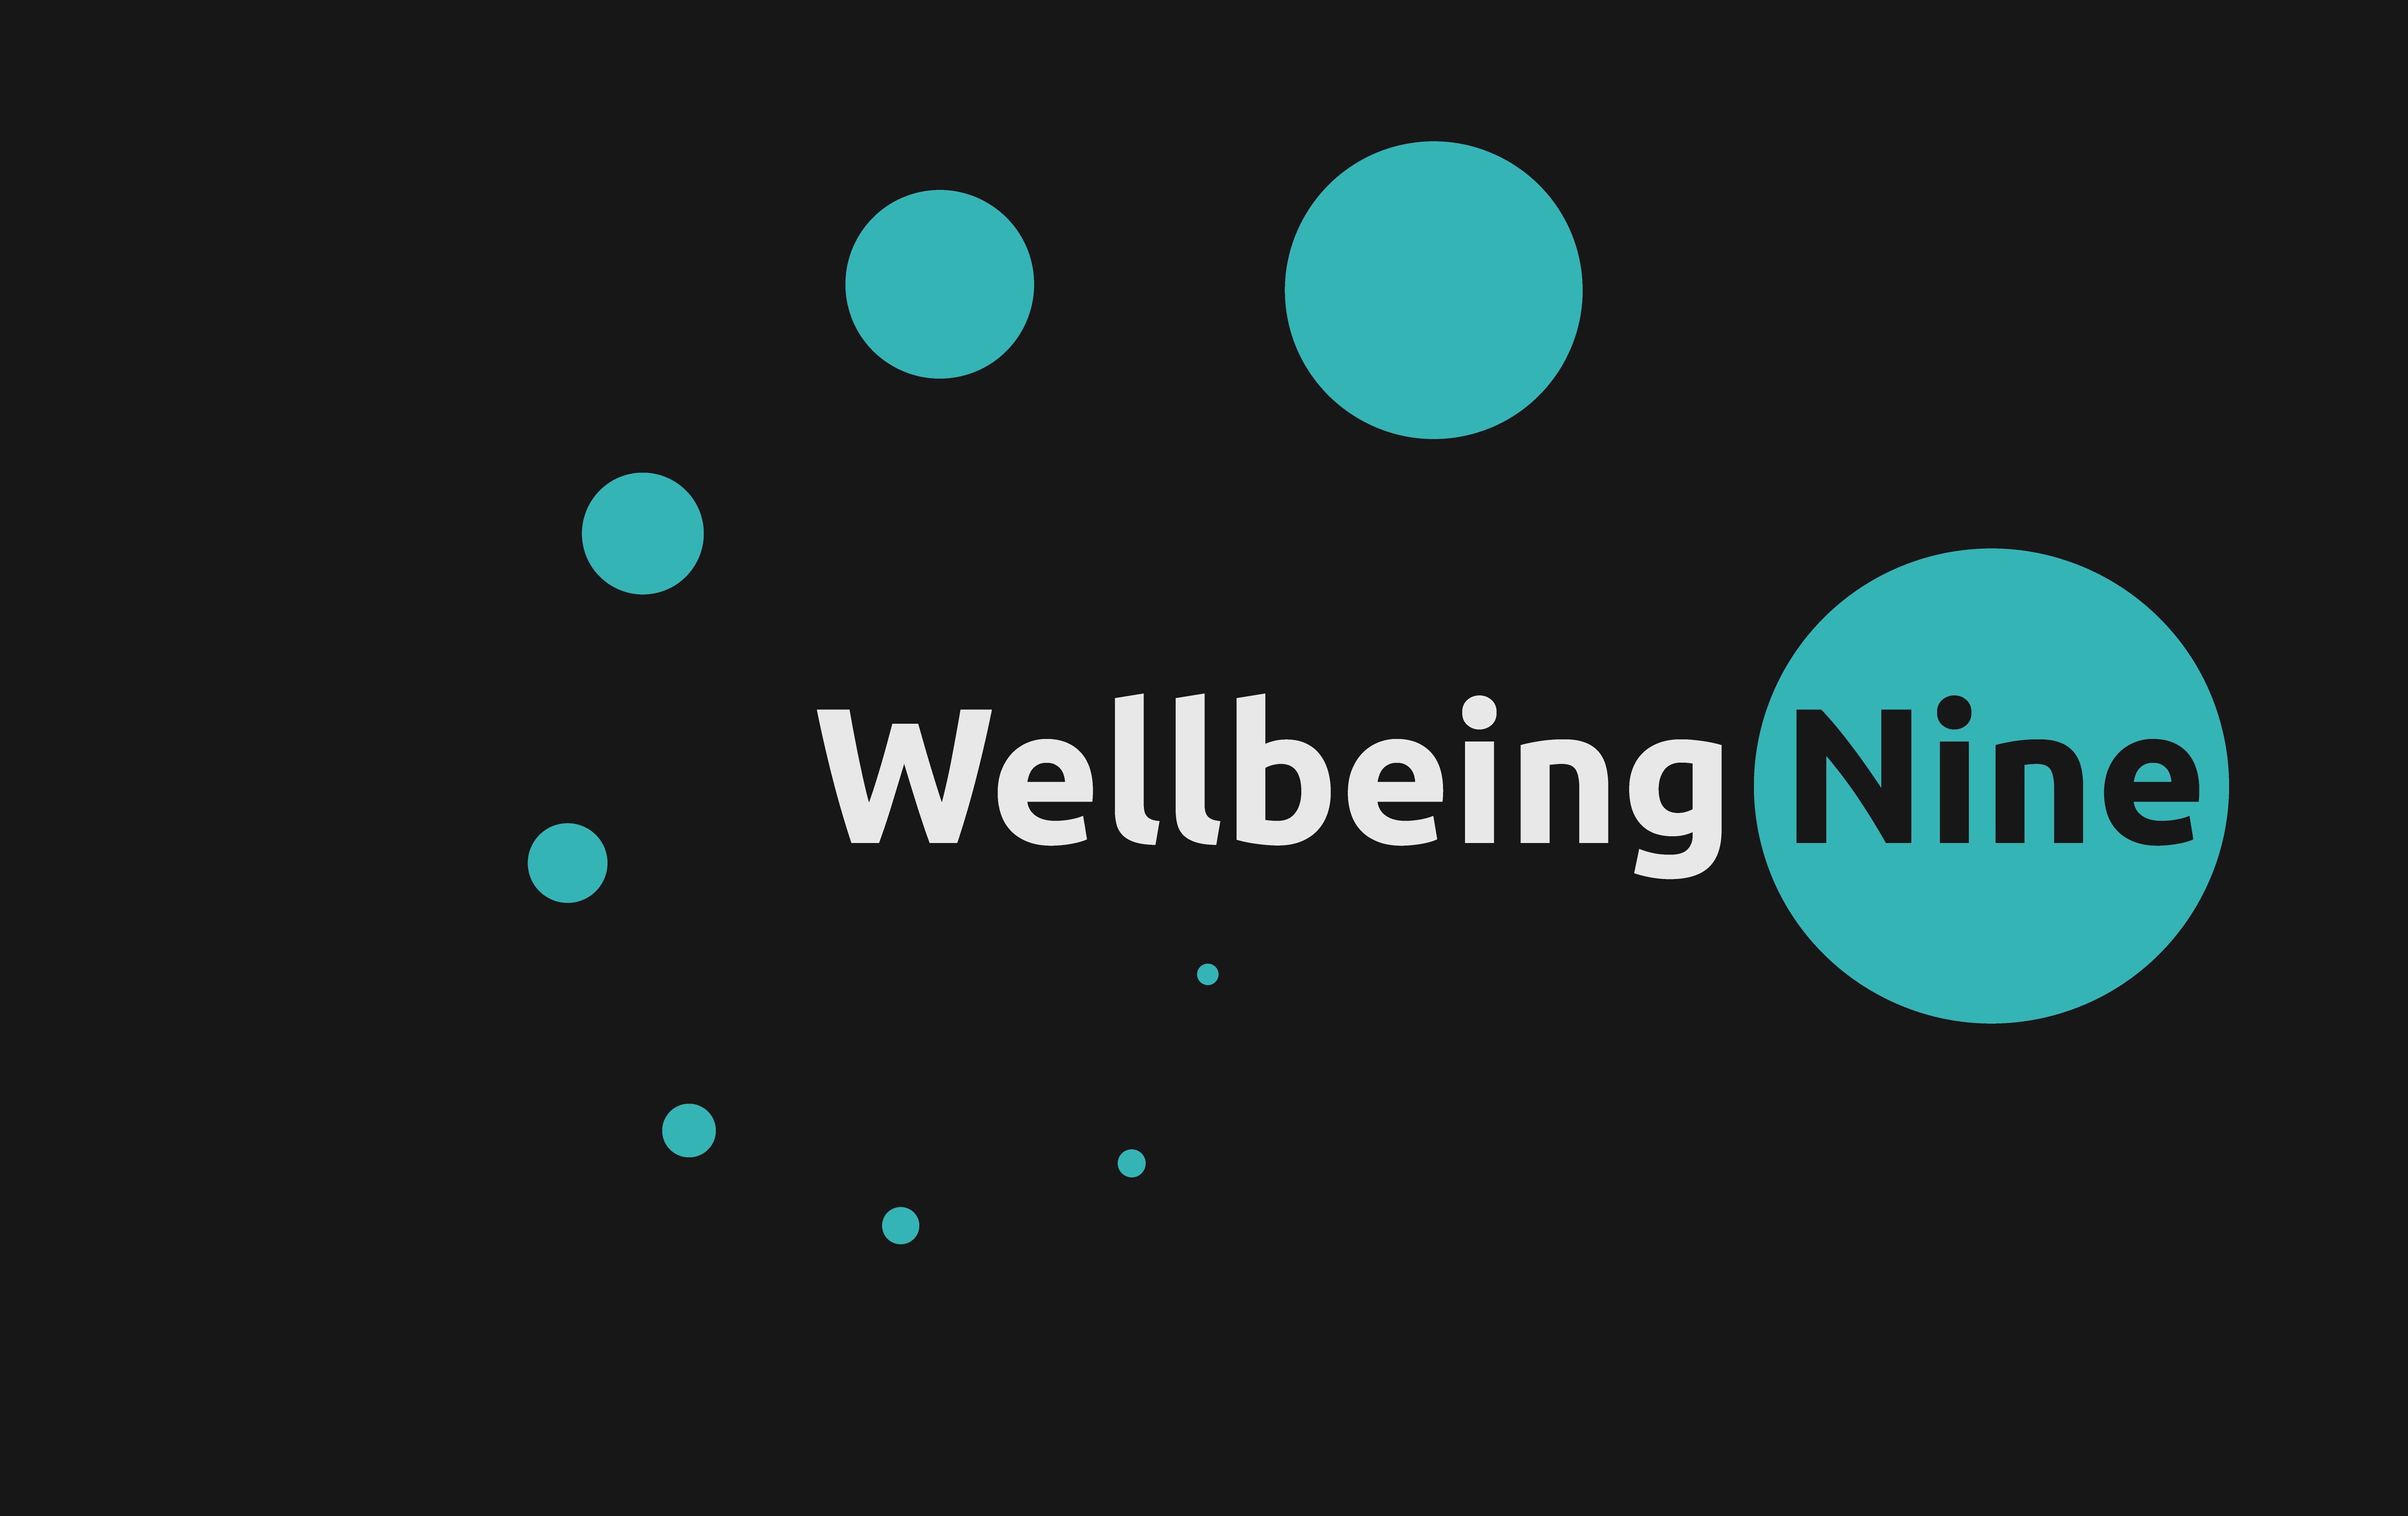 Wellbeing nine with 9 turquoise balls in a spiral